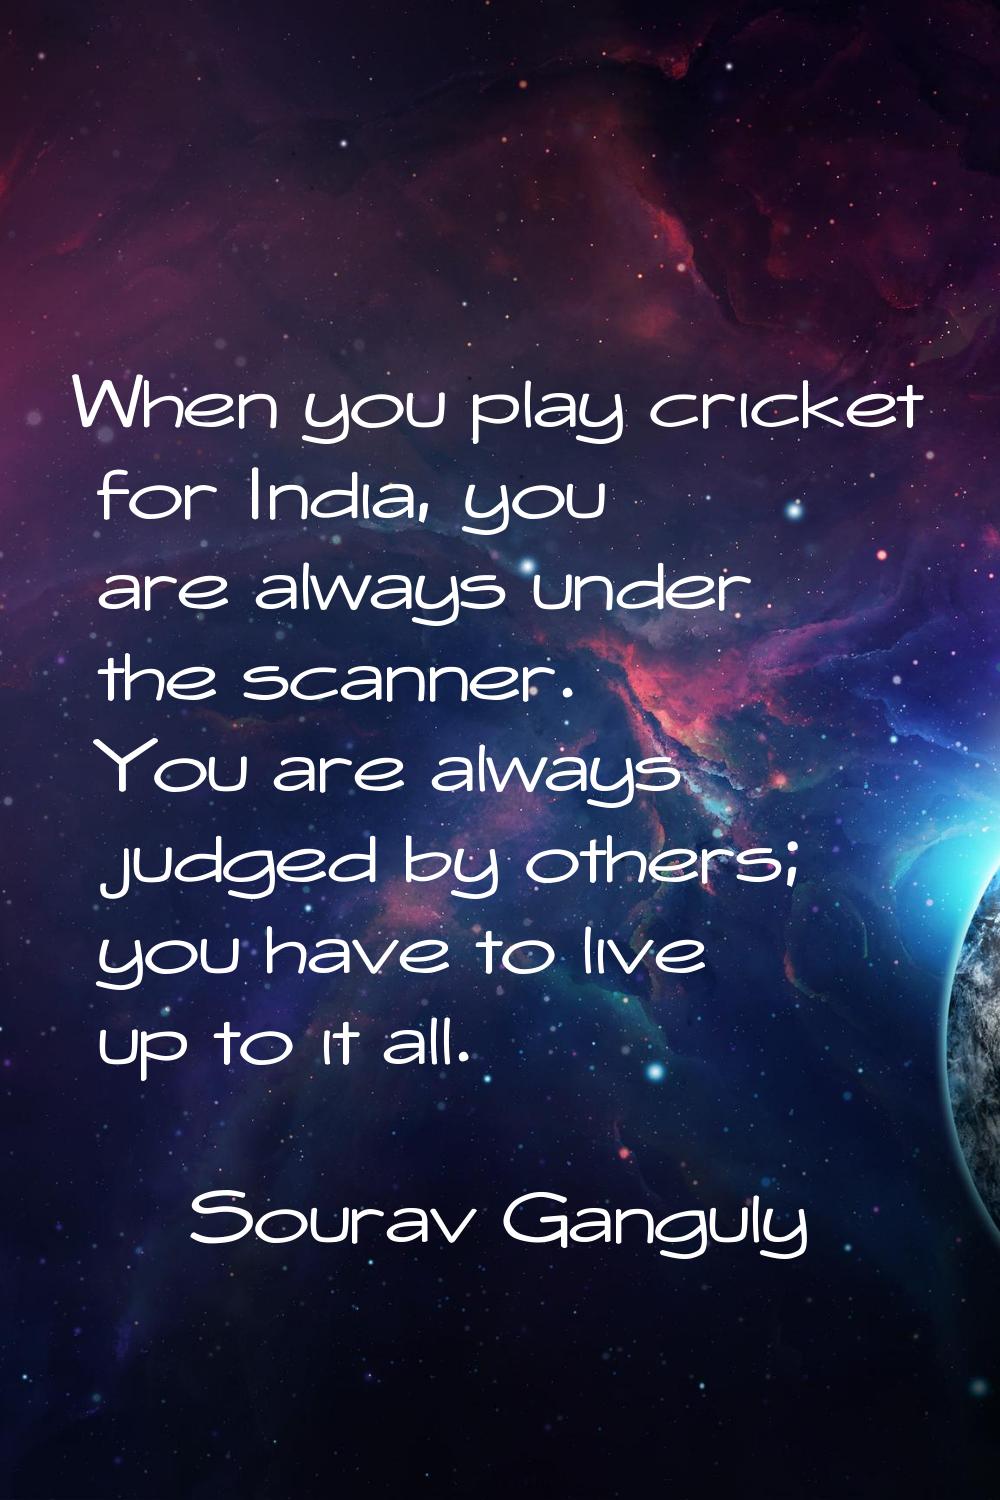 When you play cricket for India, you are always under the scanner. You are always judged by others;